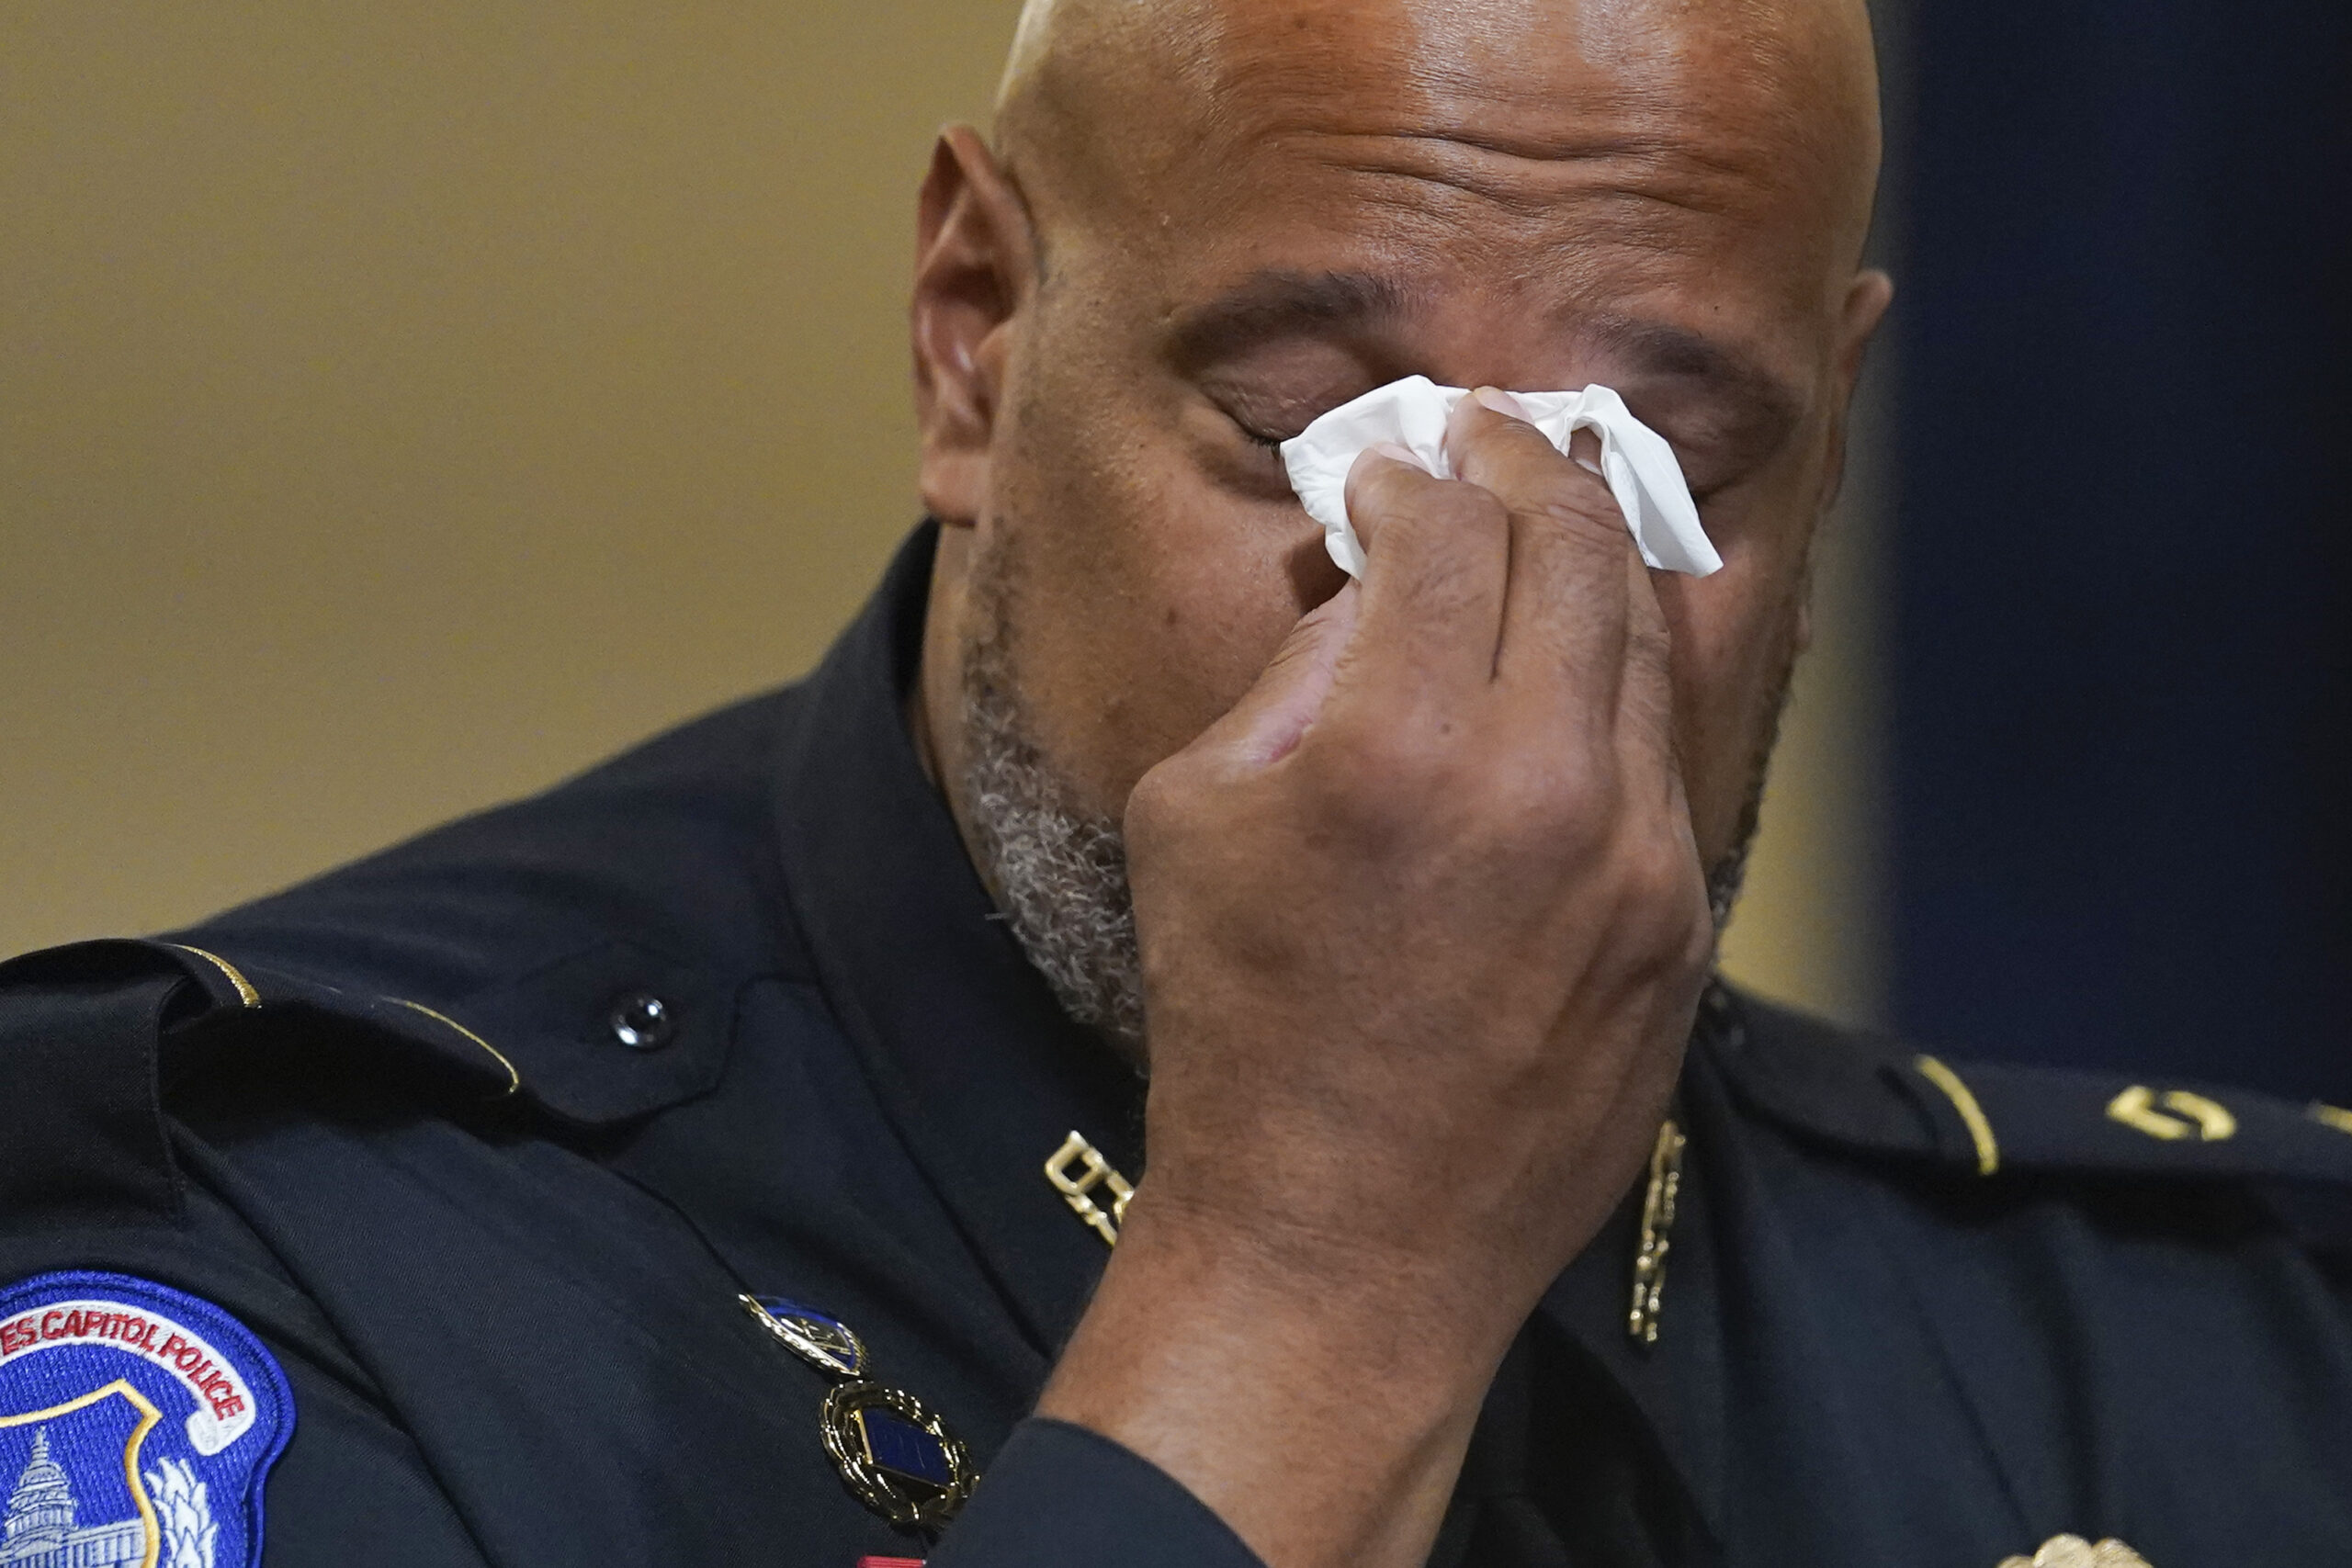 Washington Metropolitan Police Department officer Daniel Hodges wipes his eyes during the House select committee hearing on the Jan. 6 attack on Capitol Hill in Washington, Tuesday, July 27, 2021. (AP Photo/ Andrew Harnik, Pool)